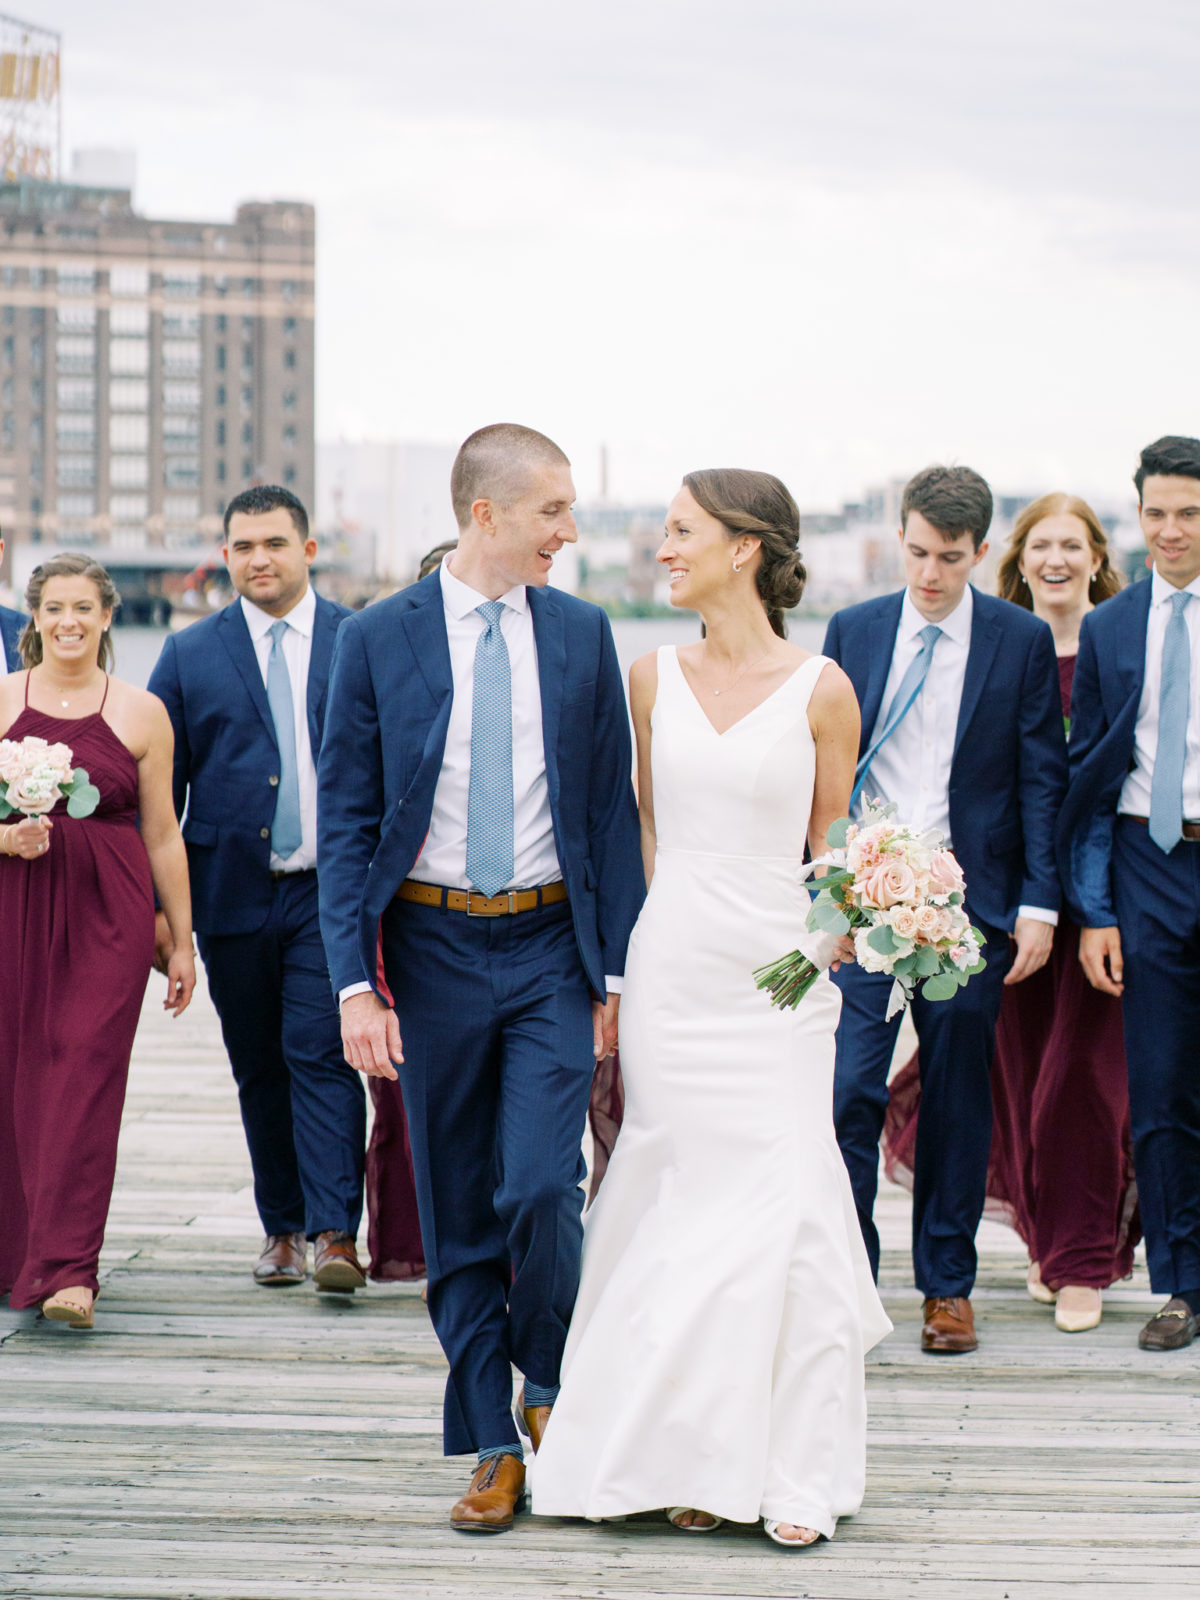 Bride and groom walk together with wedding party at Frederick Douglass-Isaac Myers Maritime Park in Baltimore Inner Harbor.